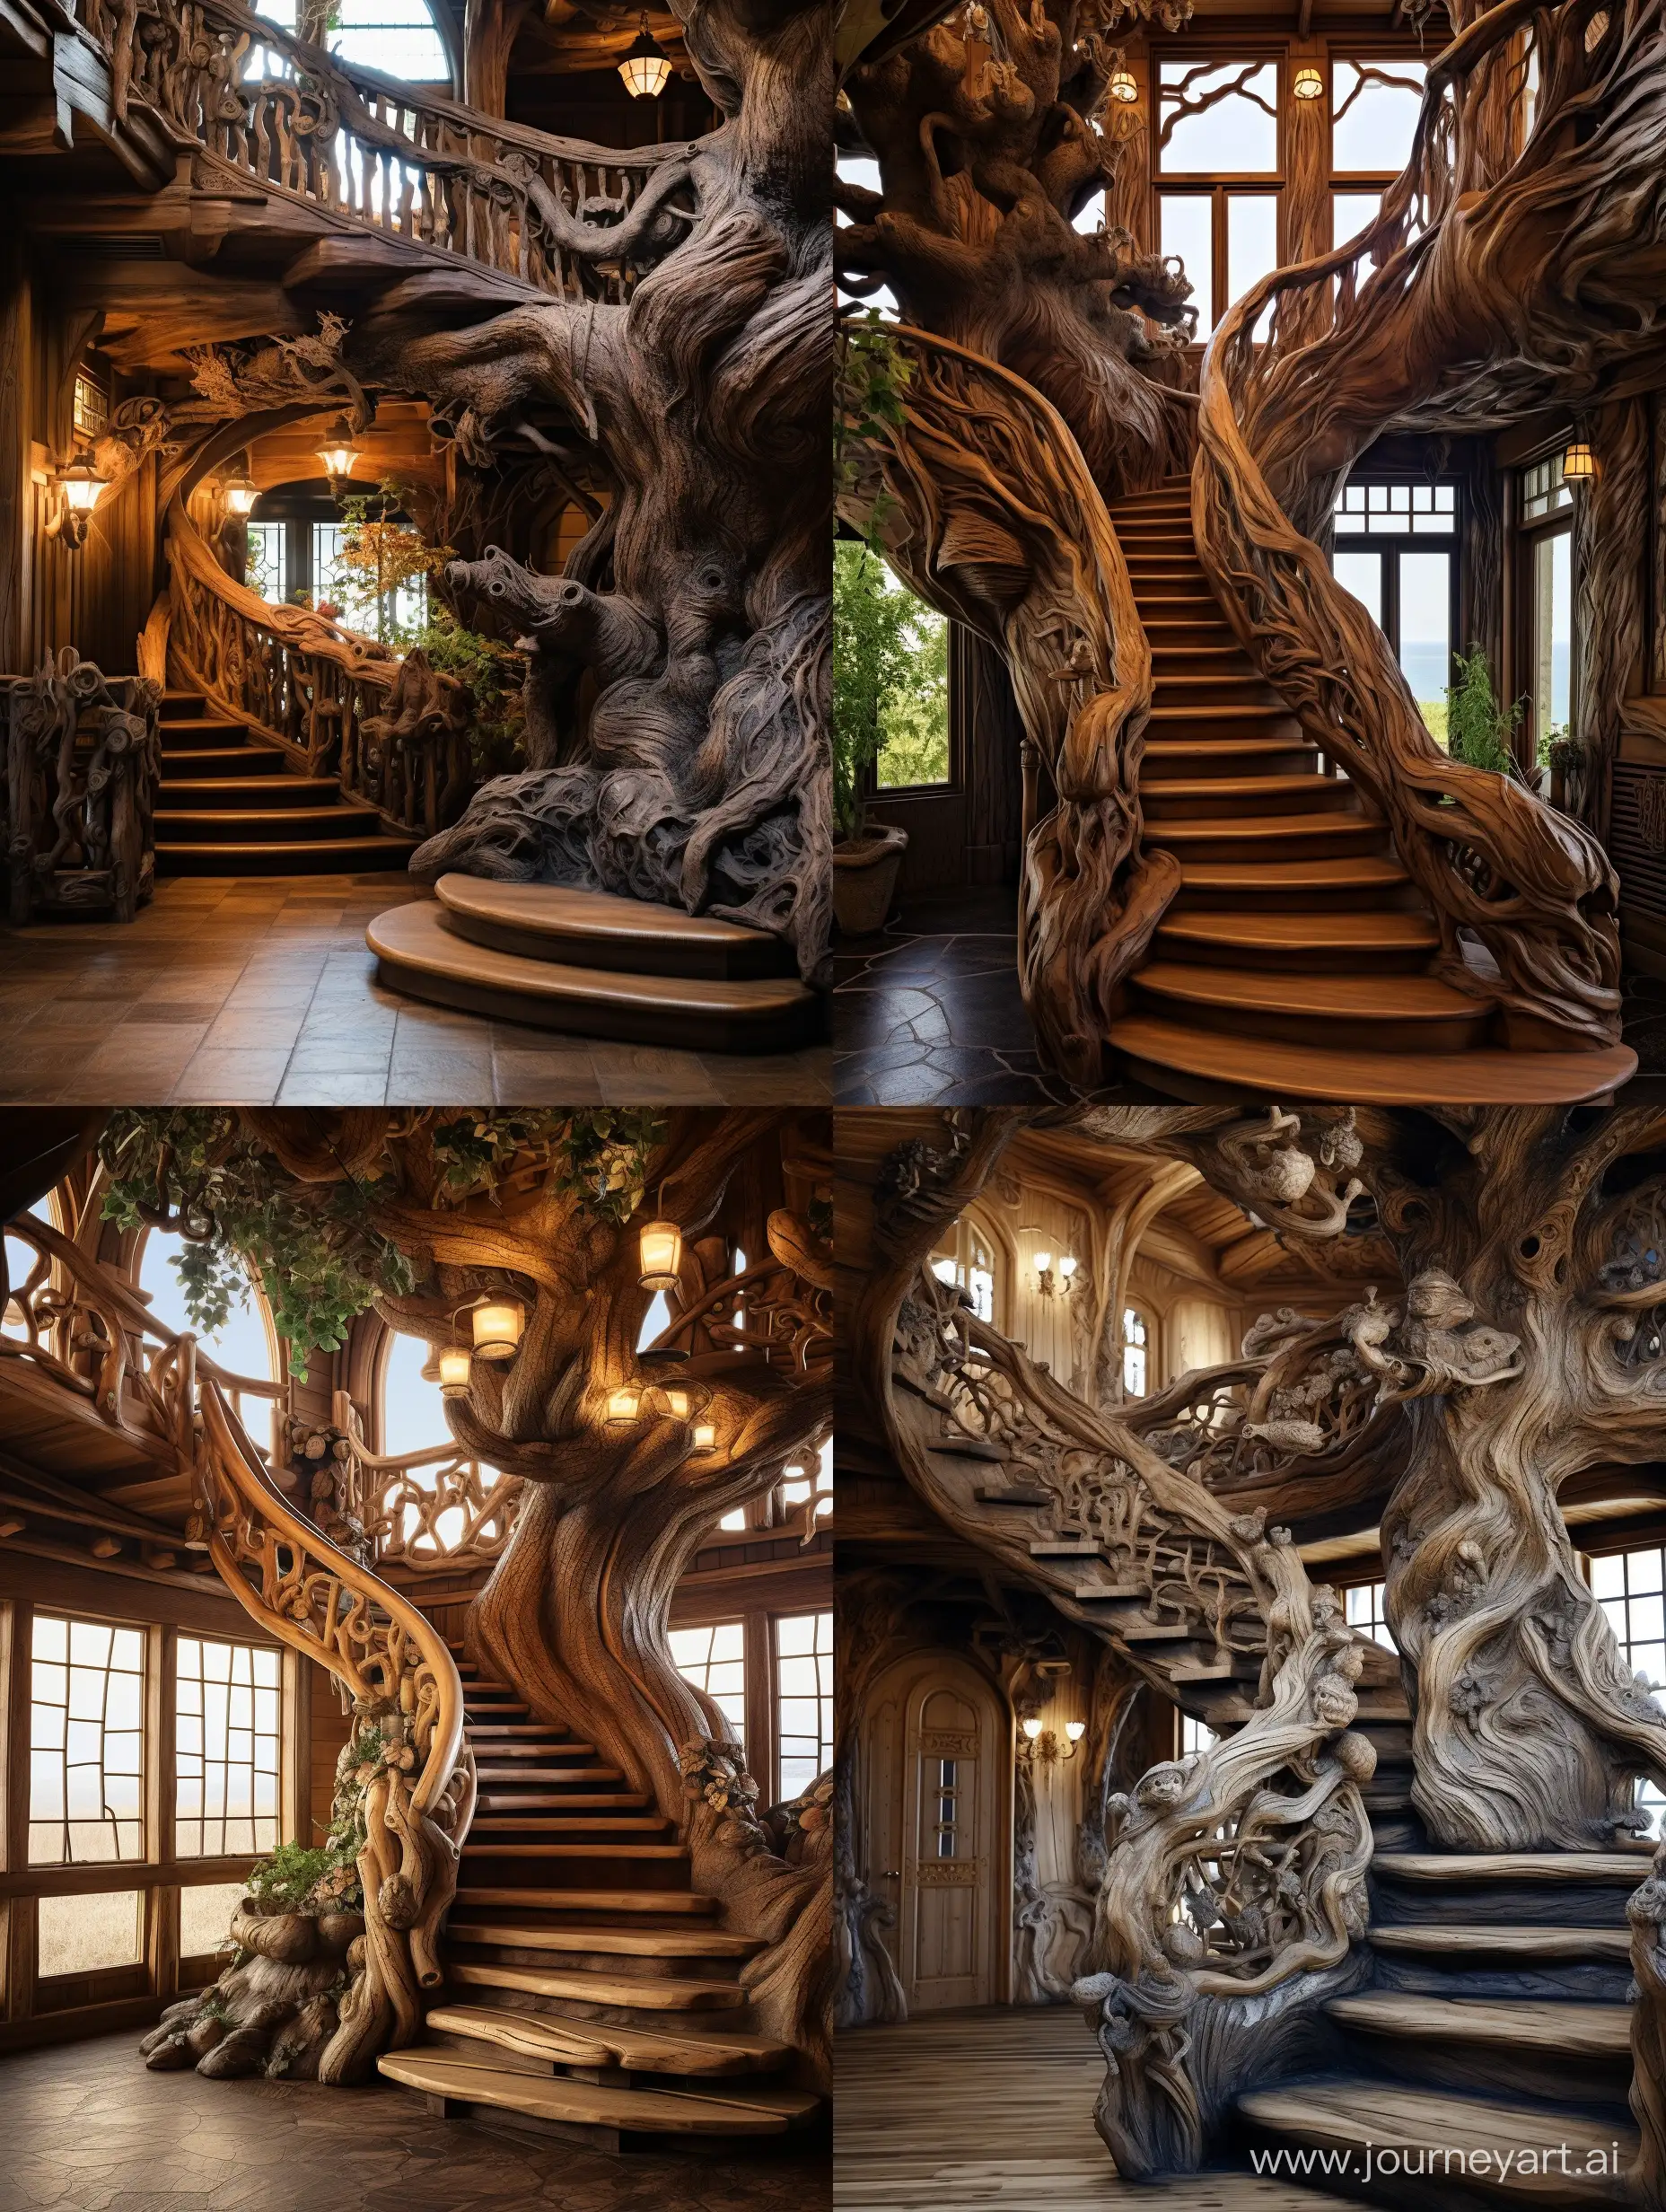 Ursula-Woodinspired-Art-Nouveau-Tree-Sculpture-Adjacent-to-Rustic-Log-Home-Stairs